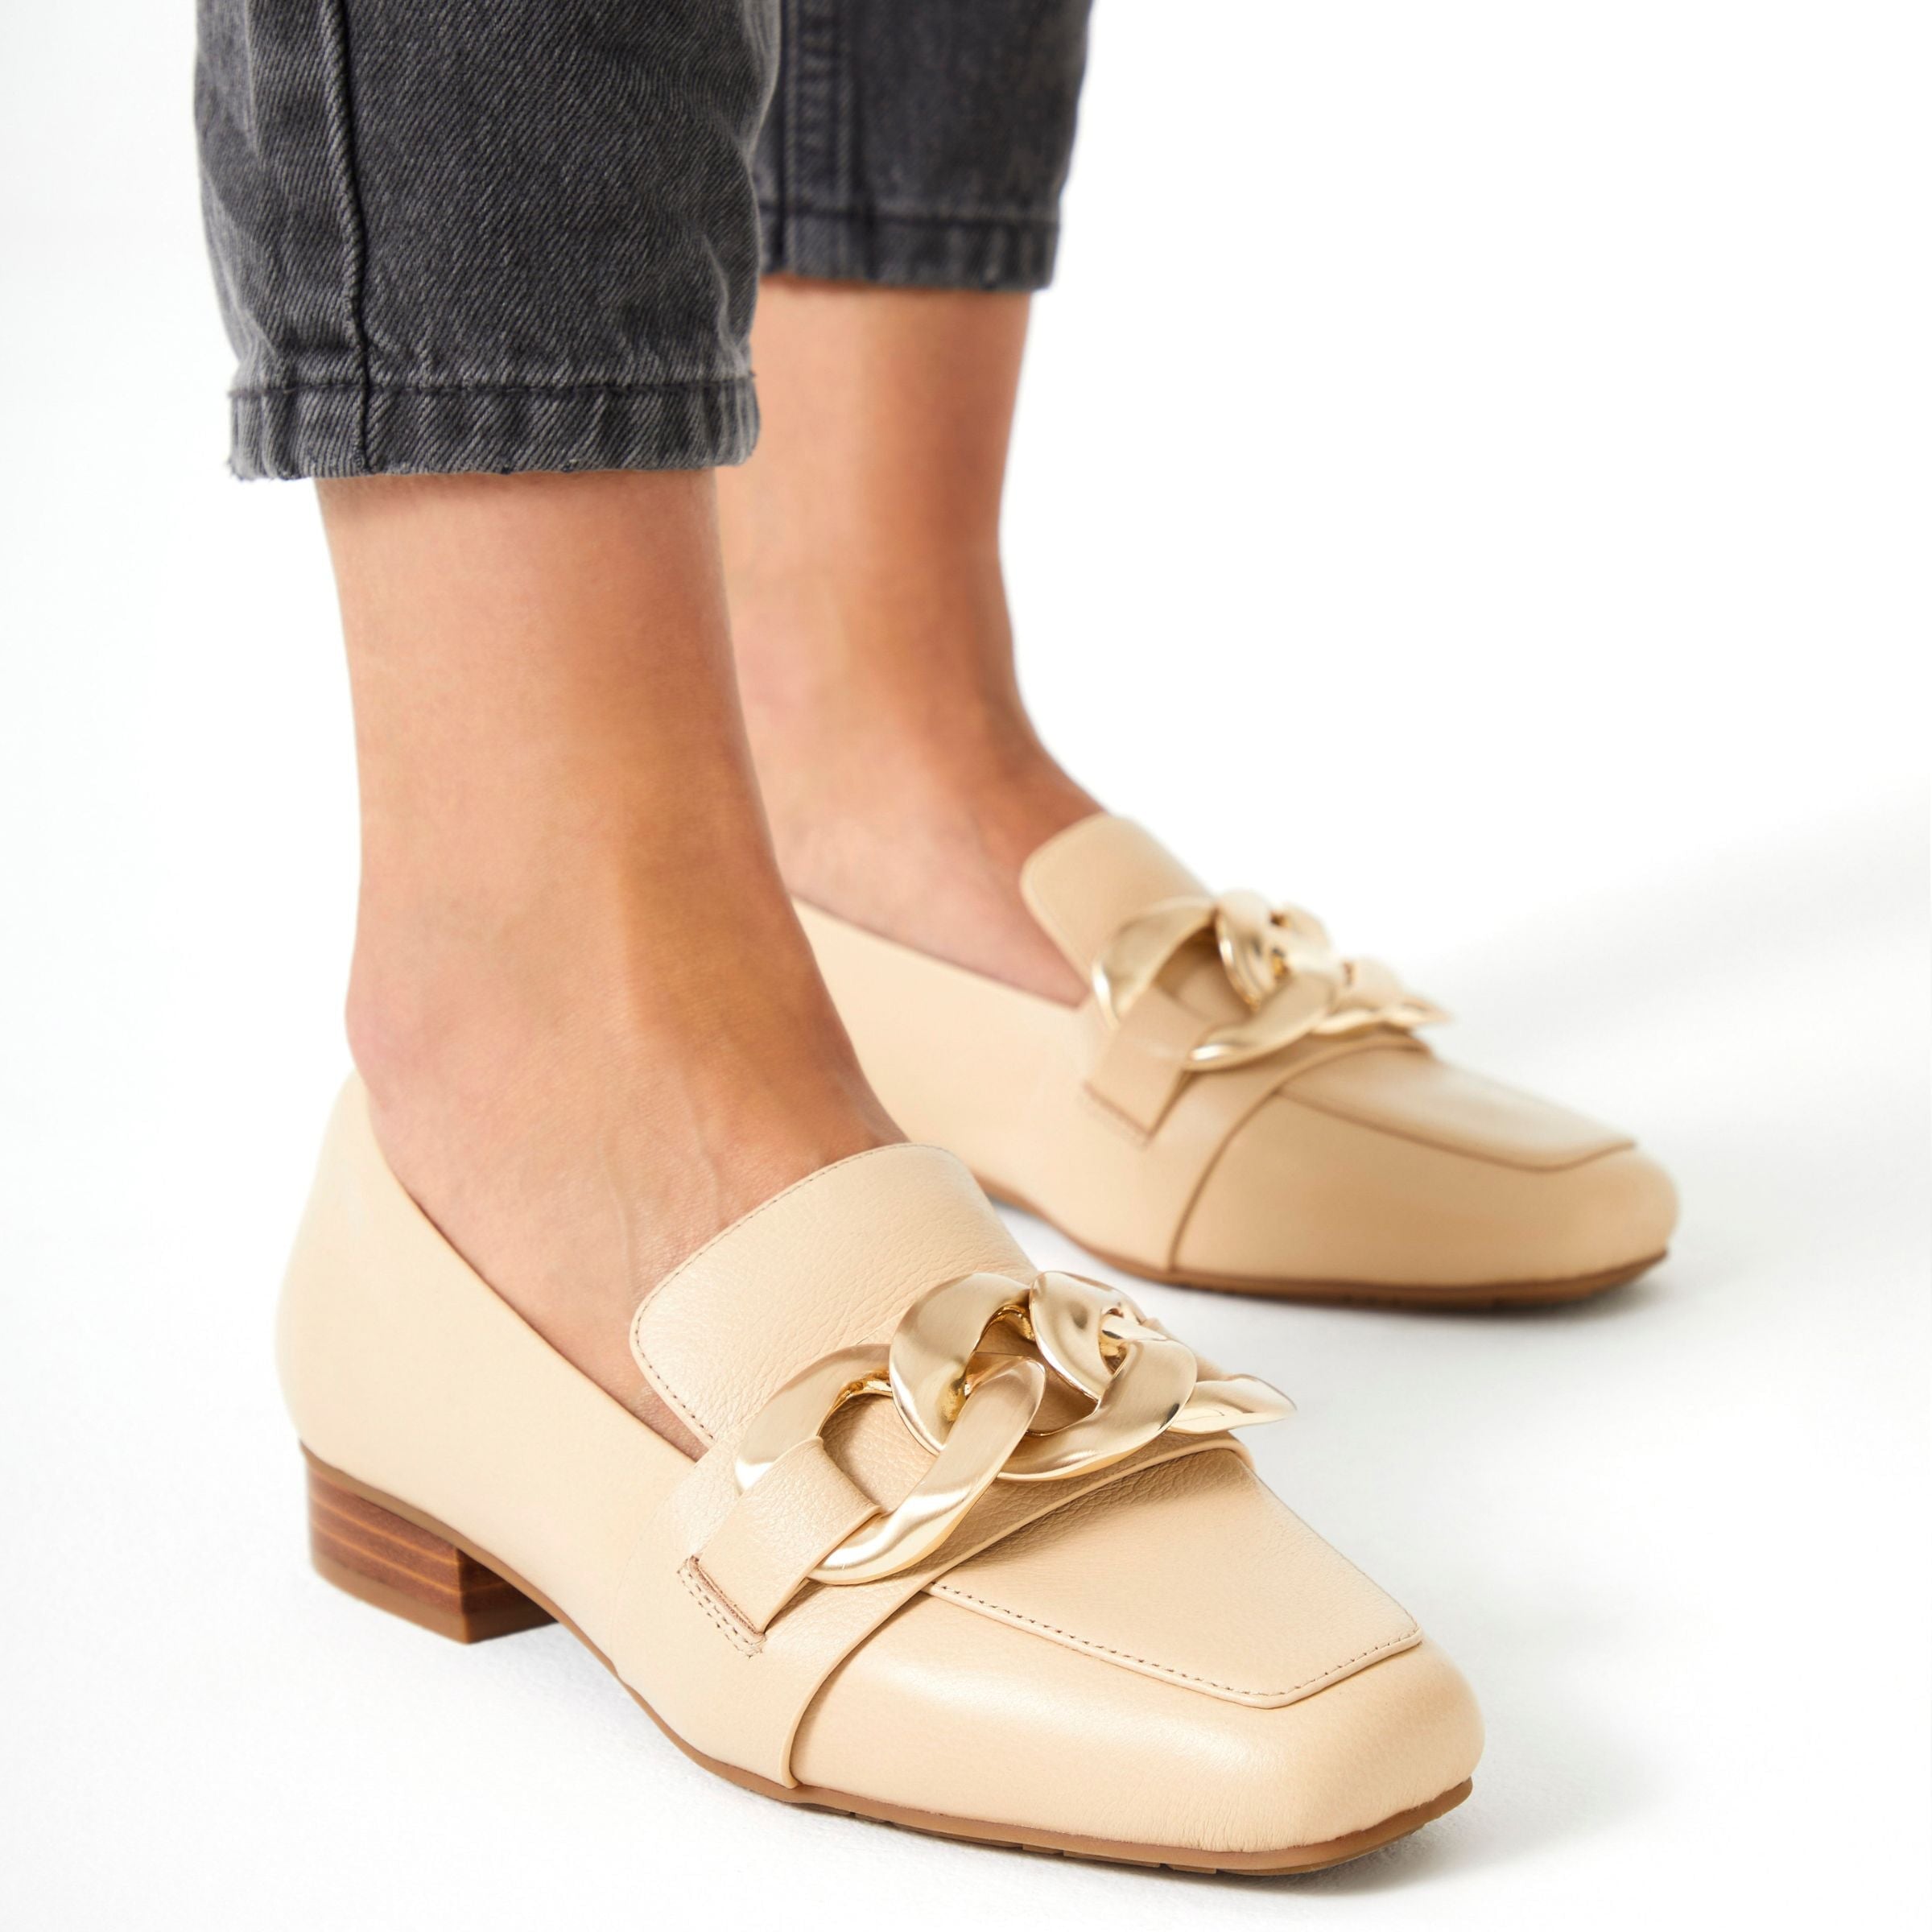 Sevilla Latte by Hush Puppies| Womens work shoes by white back drop all day wear comfort